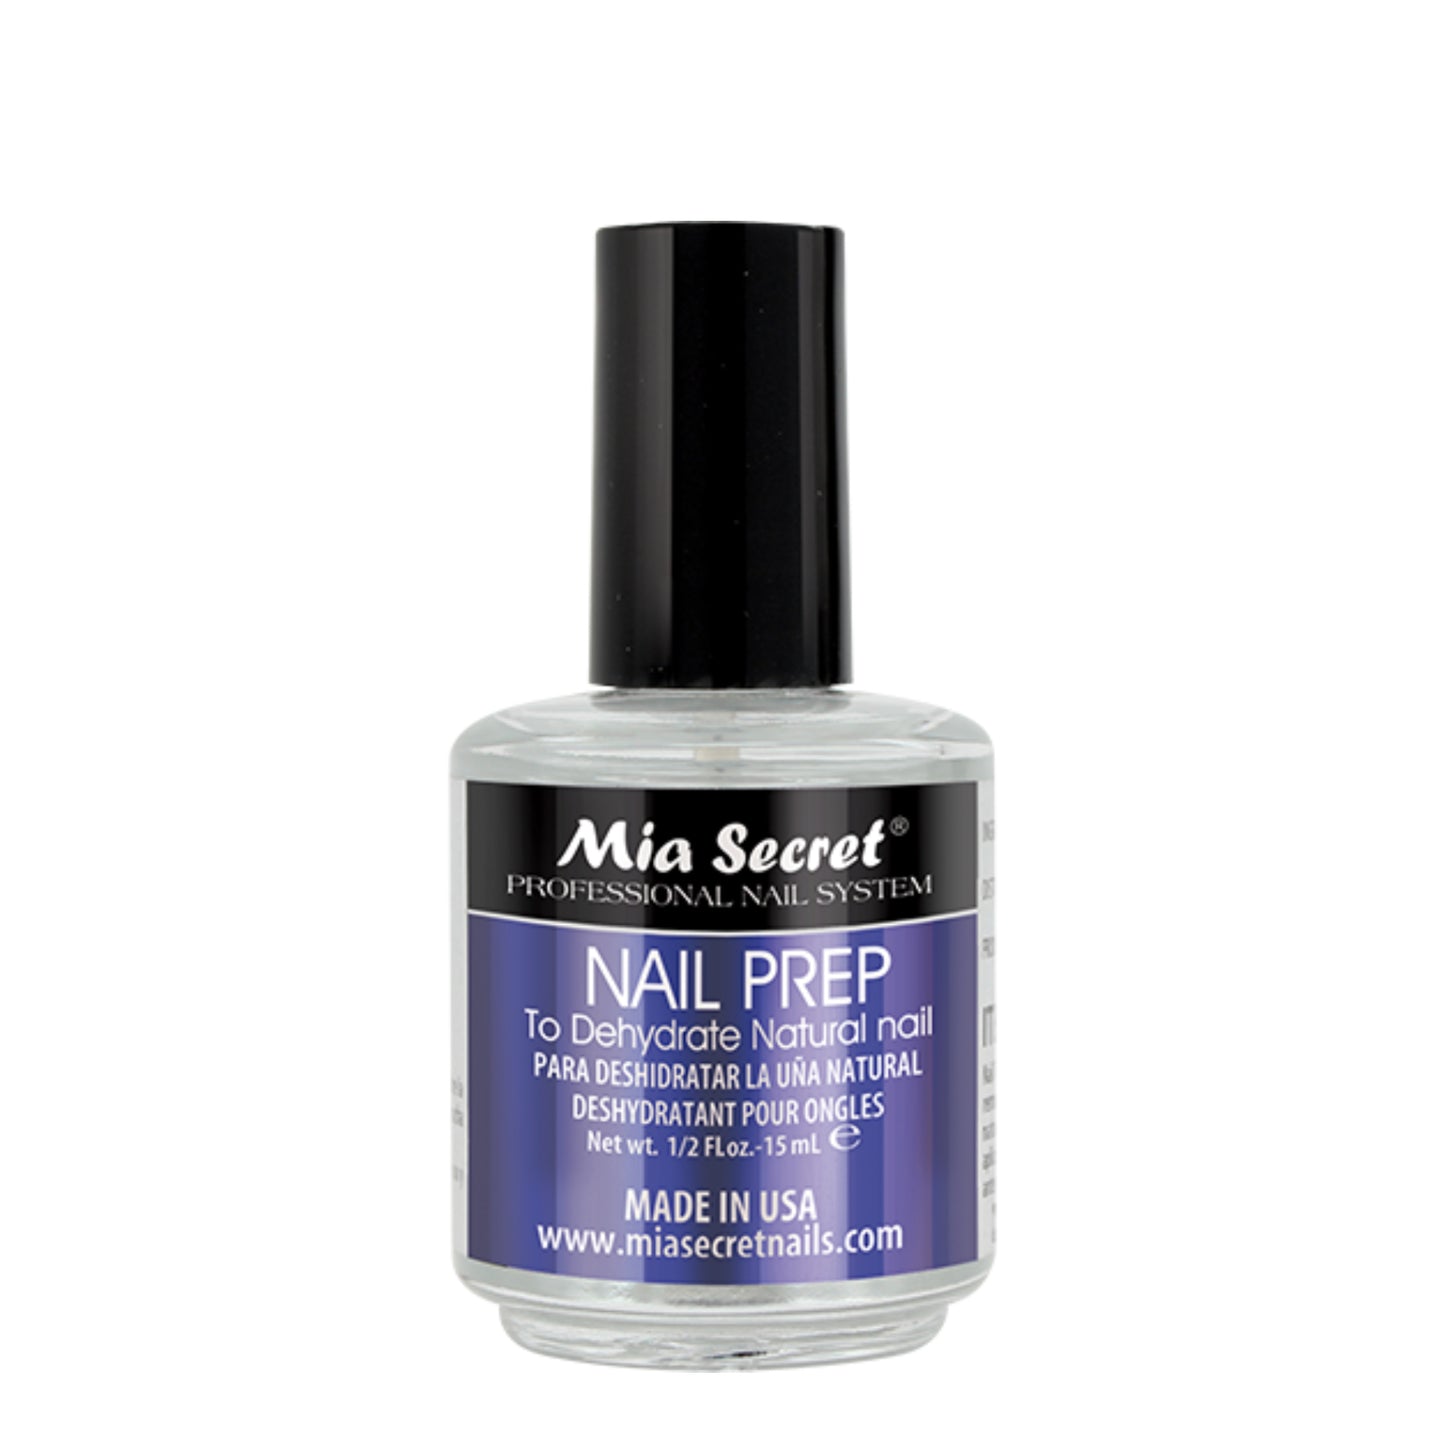 Mia Secret Nail Prep - dehydrates natural nails and removes natural oils, increasing adhesion and duration for nail polishes, acrylic and gel systems. Apply before XTRABOND